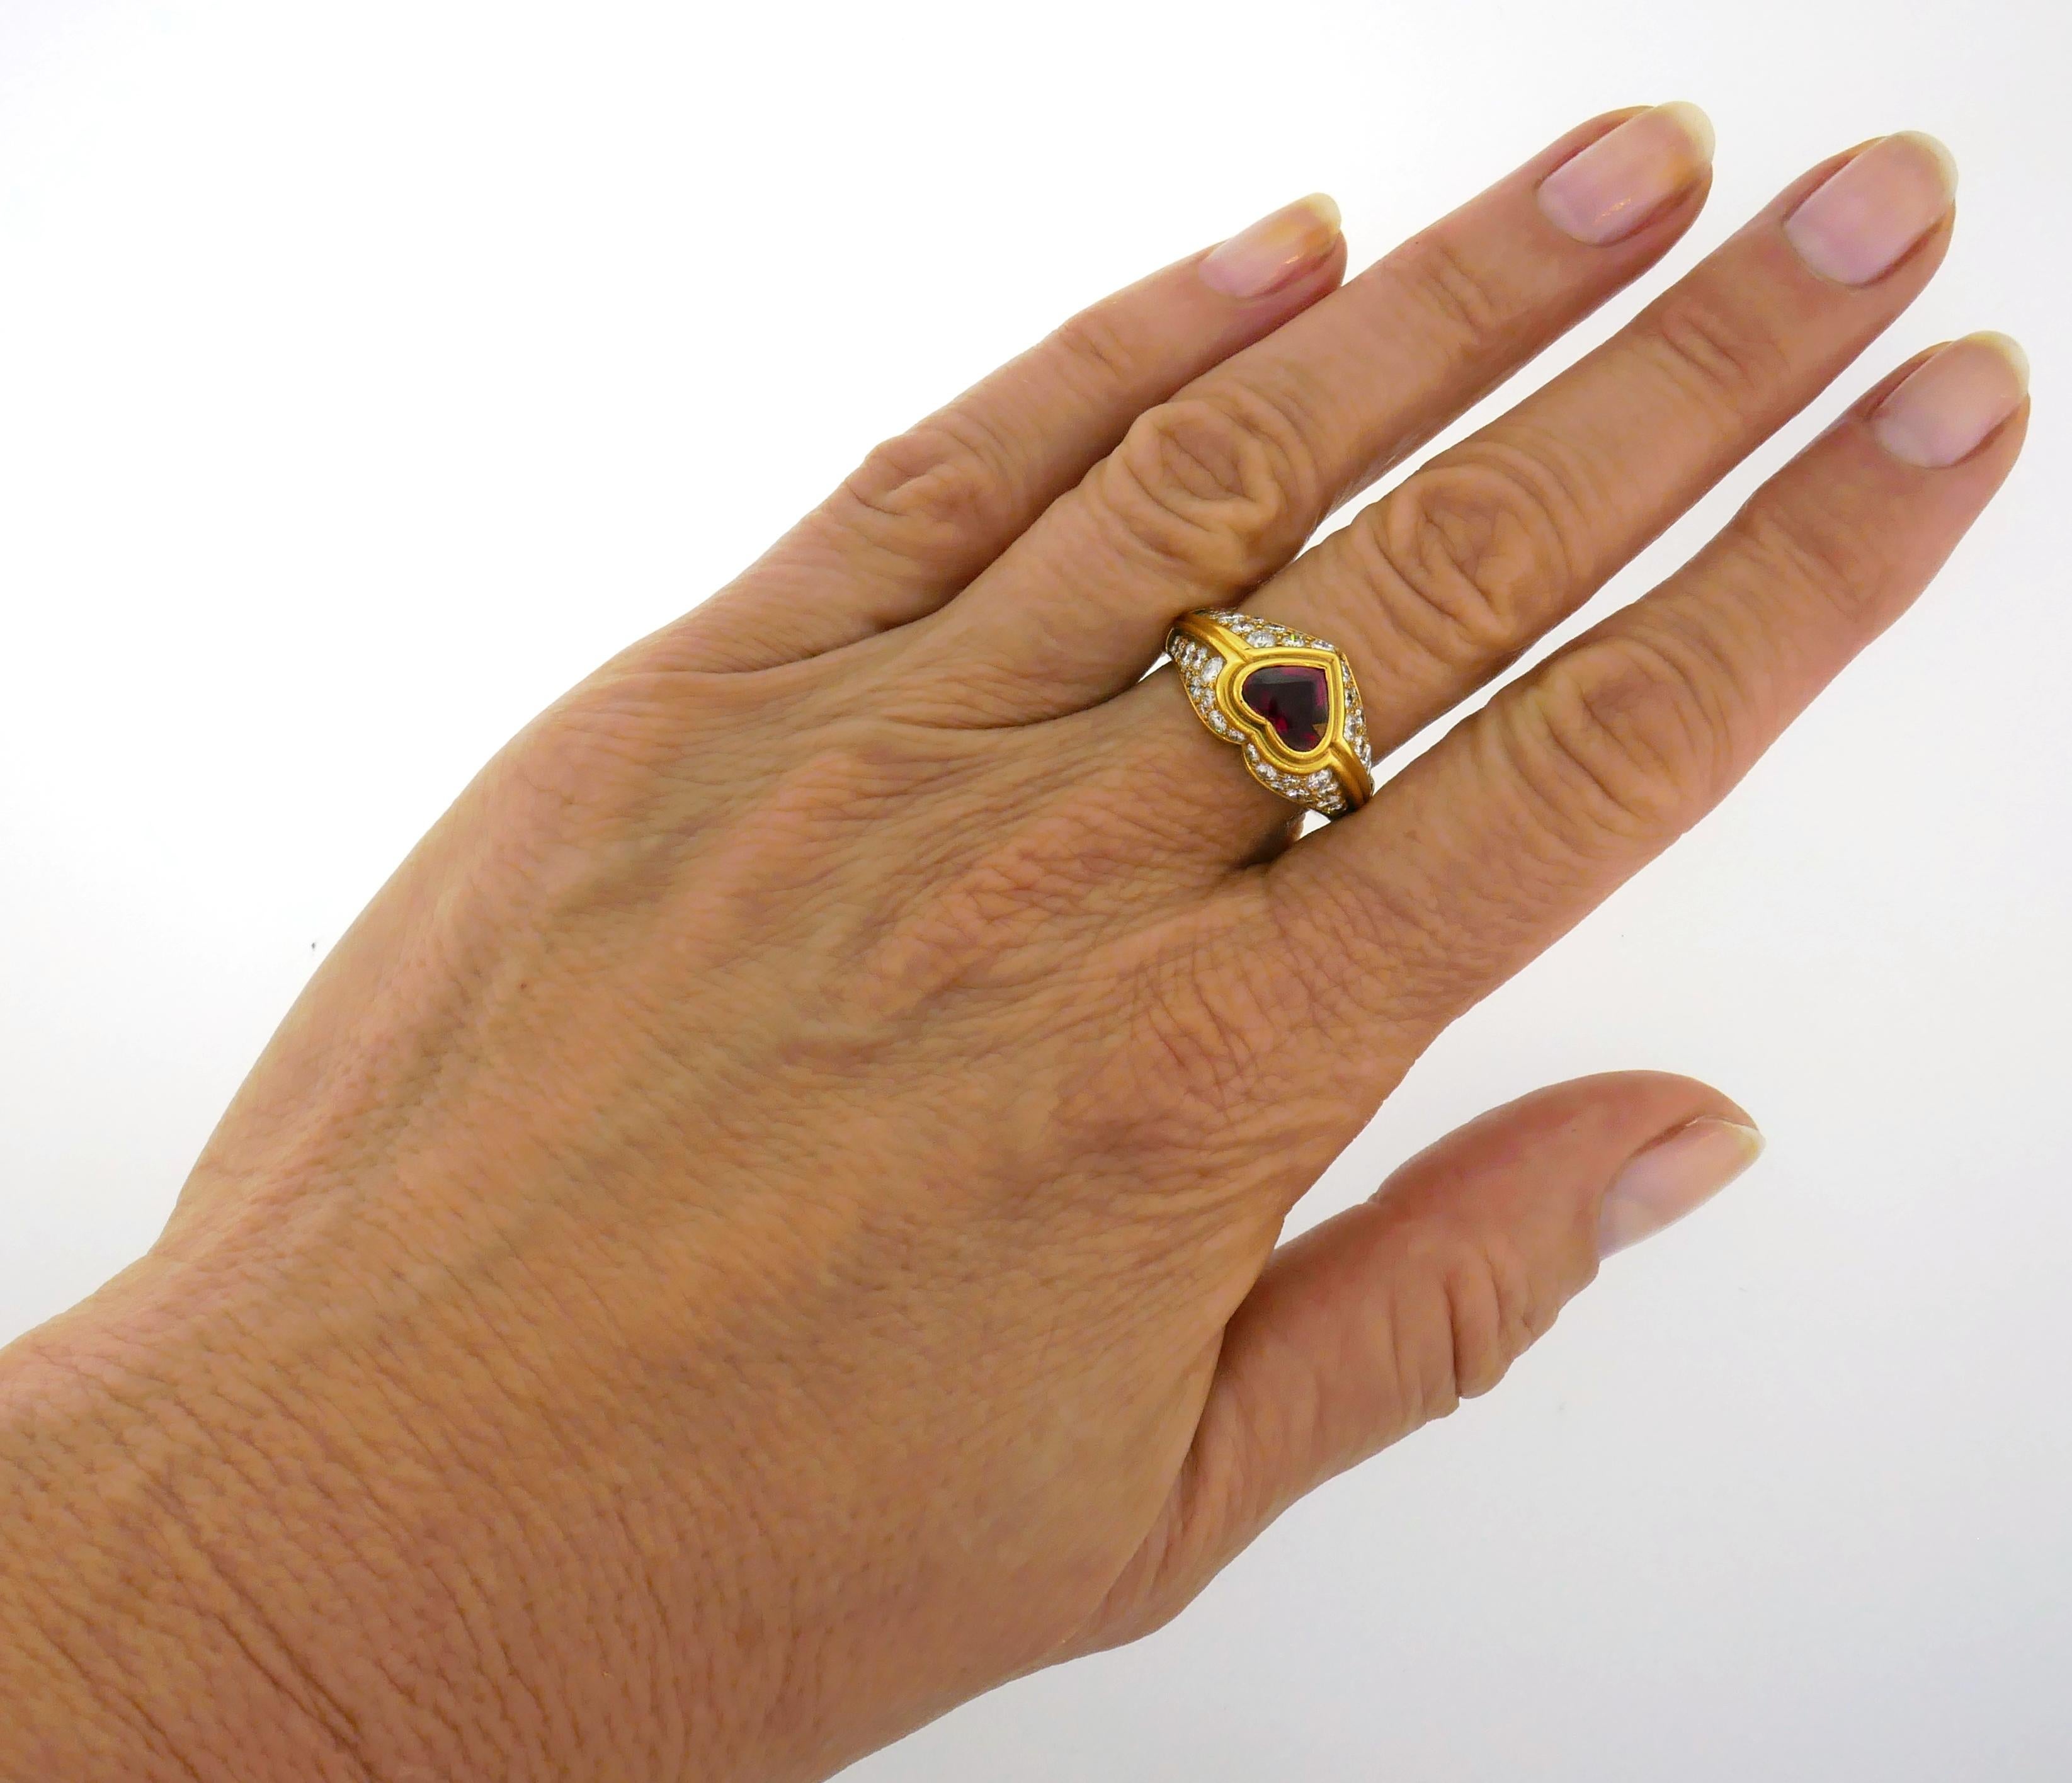 Classic yet prominent cocktail ring created by Bulgari in Italy in the 1980's. Colorful, elegant and wearable, the ring is a great addition to your jewelry collection.
The ring is made of 18 karat yellow gold and features a  1.49-carat natural